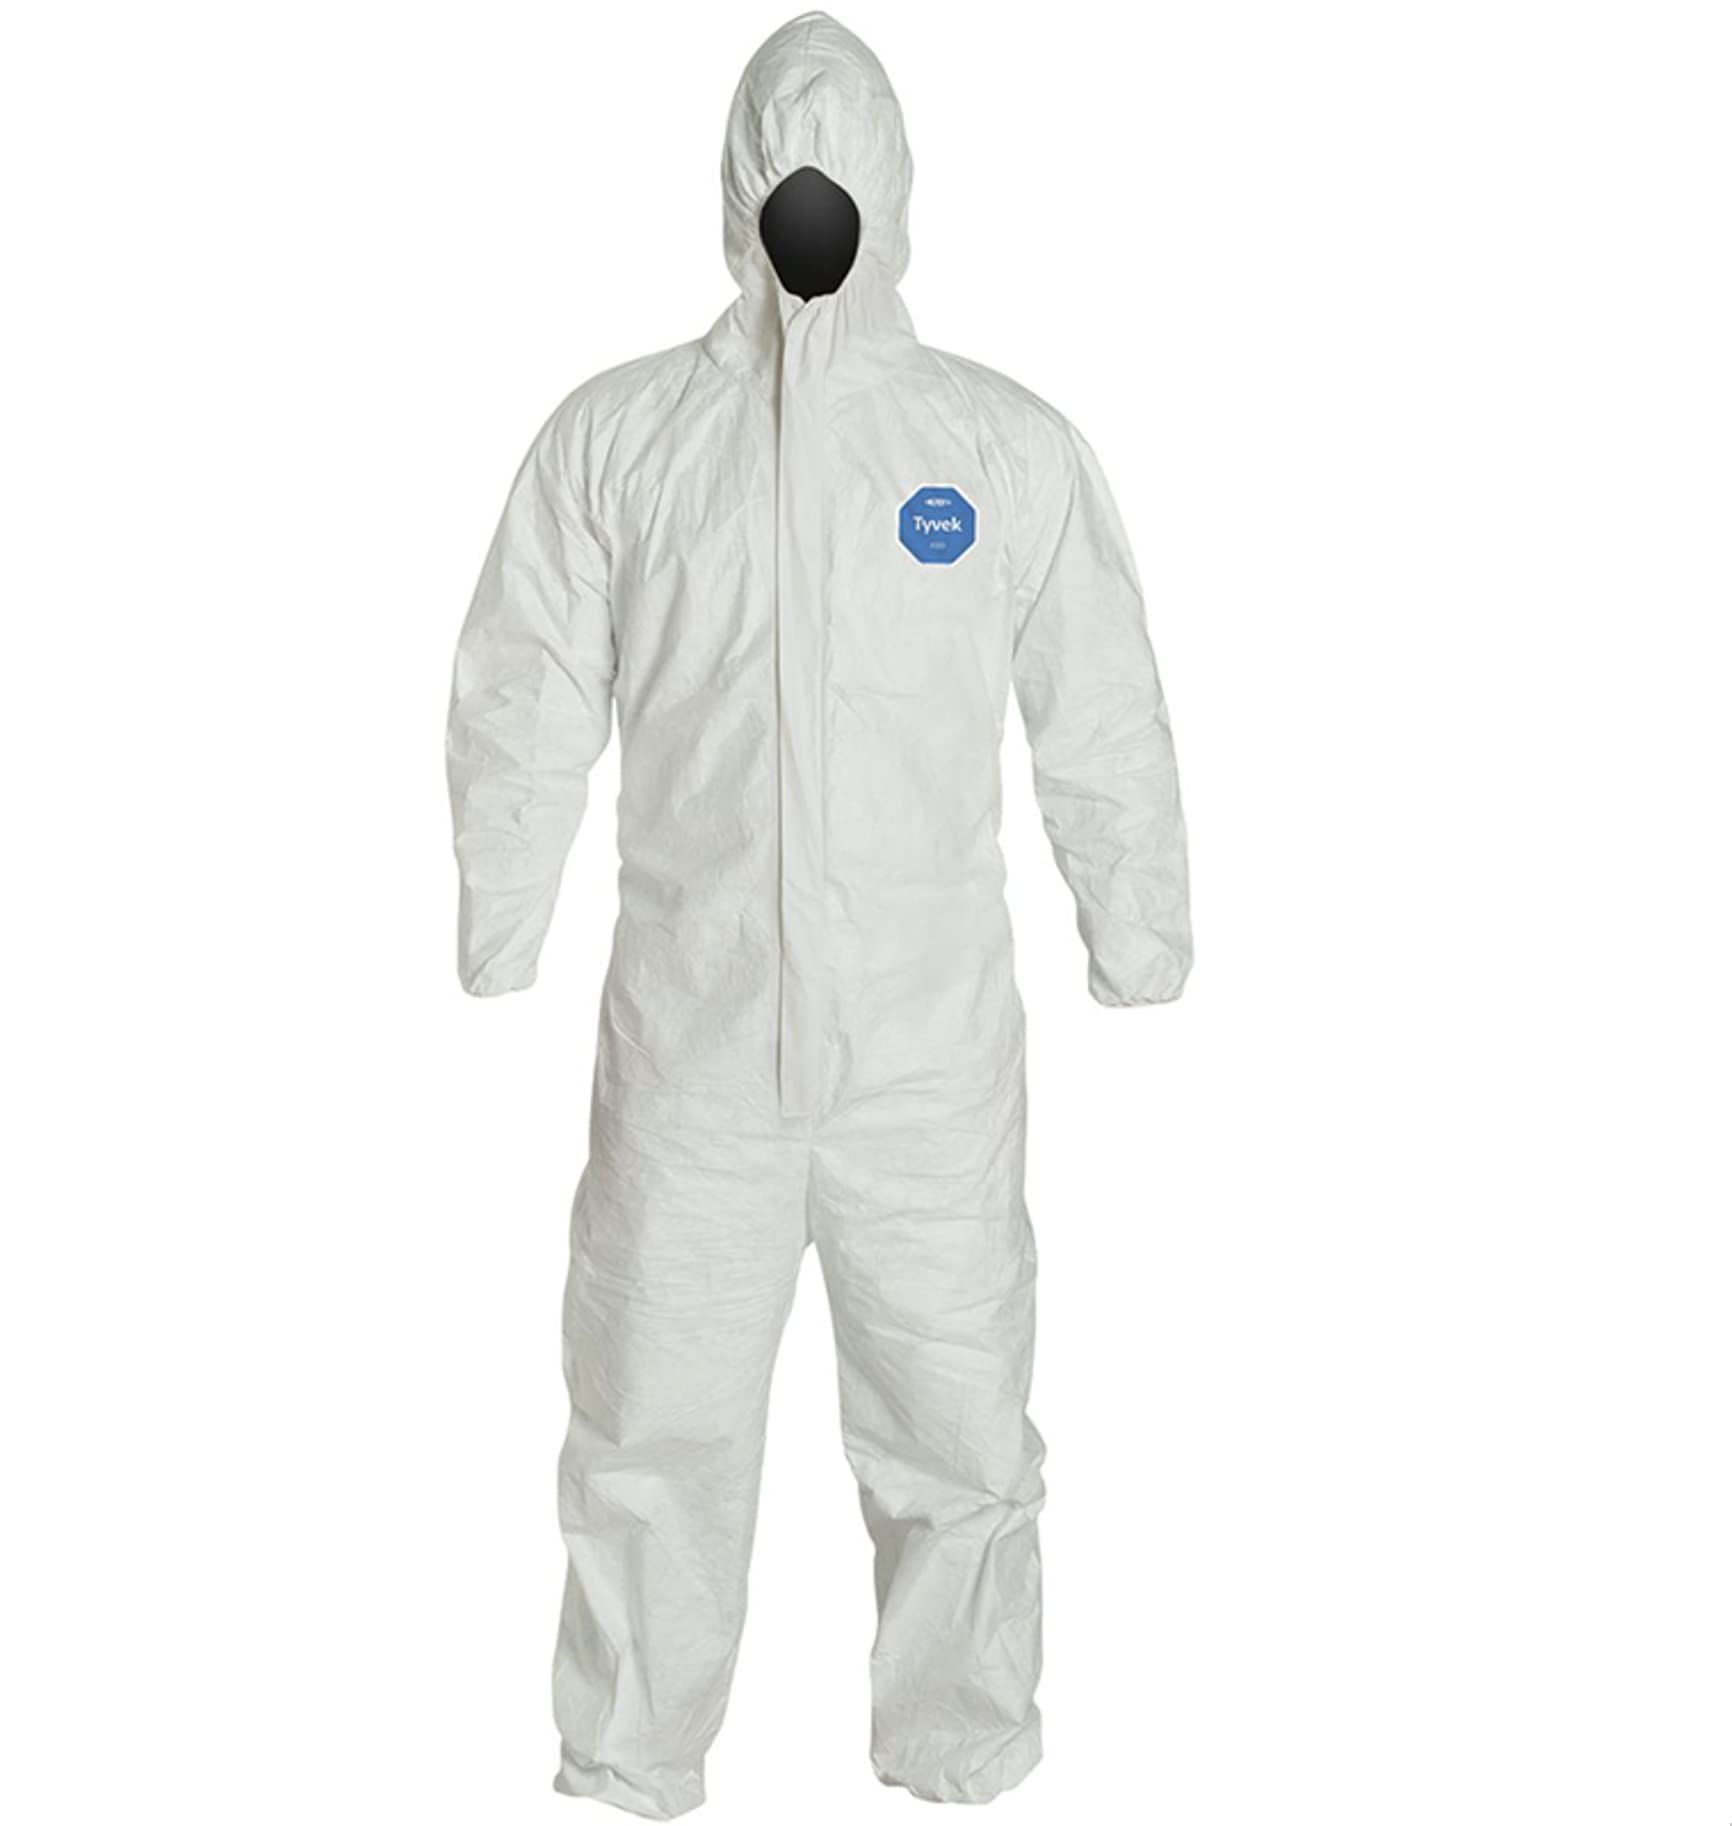 DuPont Tyvek Disposable Coveralls With Hood - TYVEK COVERALL WITH HOOD - X-LARGE, White